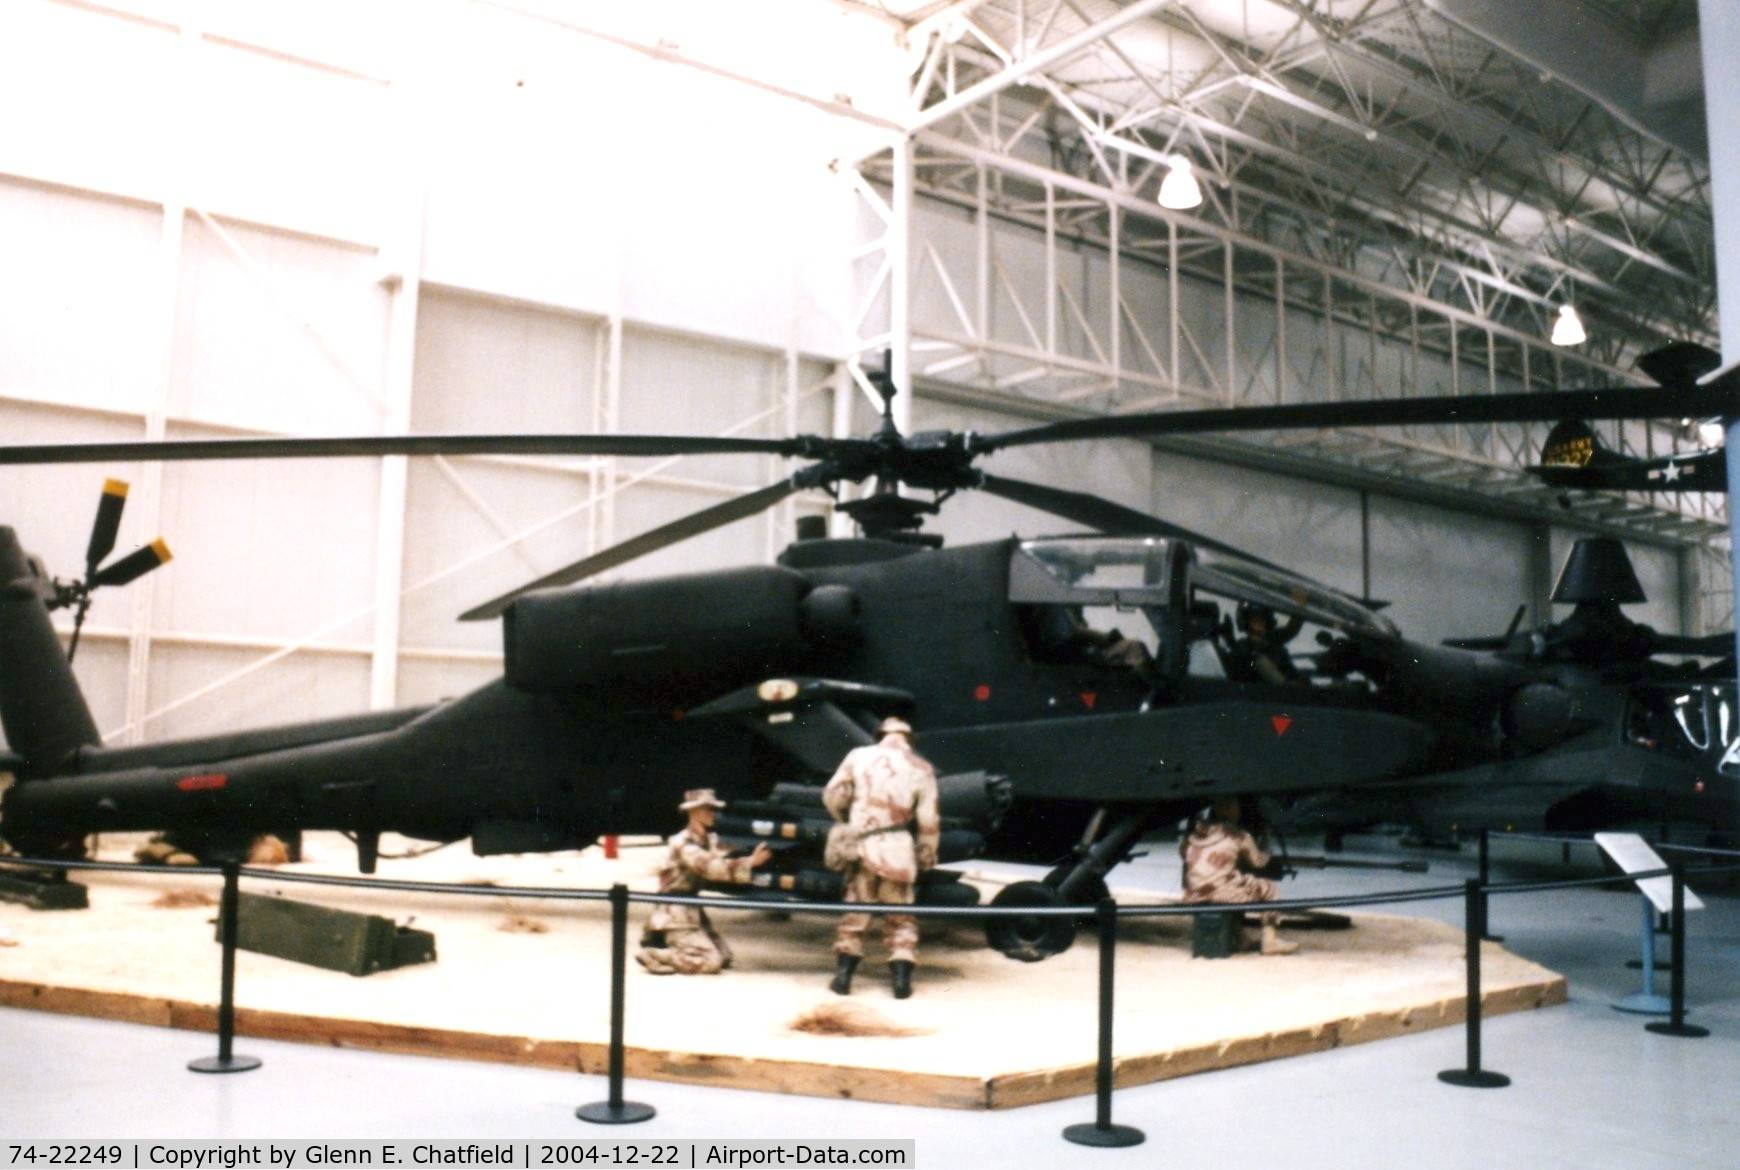 74-22249, 1975 Hughes YAH-64A Apache C/N AV.03, YAH-64A at the Army Aviation Museum.  Sometimes noted as 73-22249